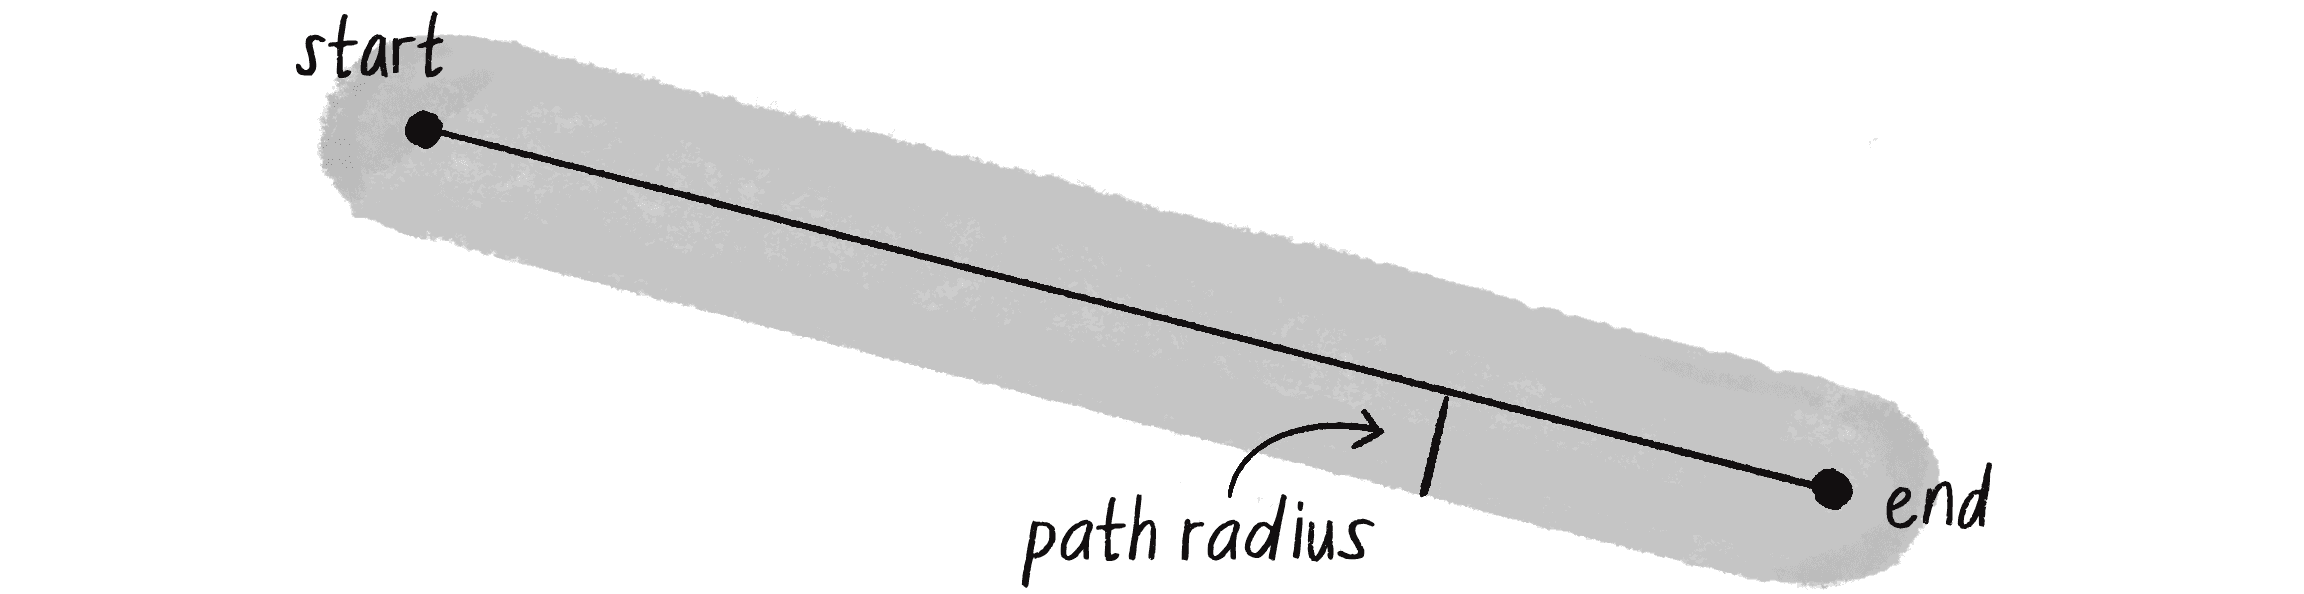 Figure 5.21: A path with a start, end, and radius